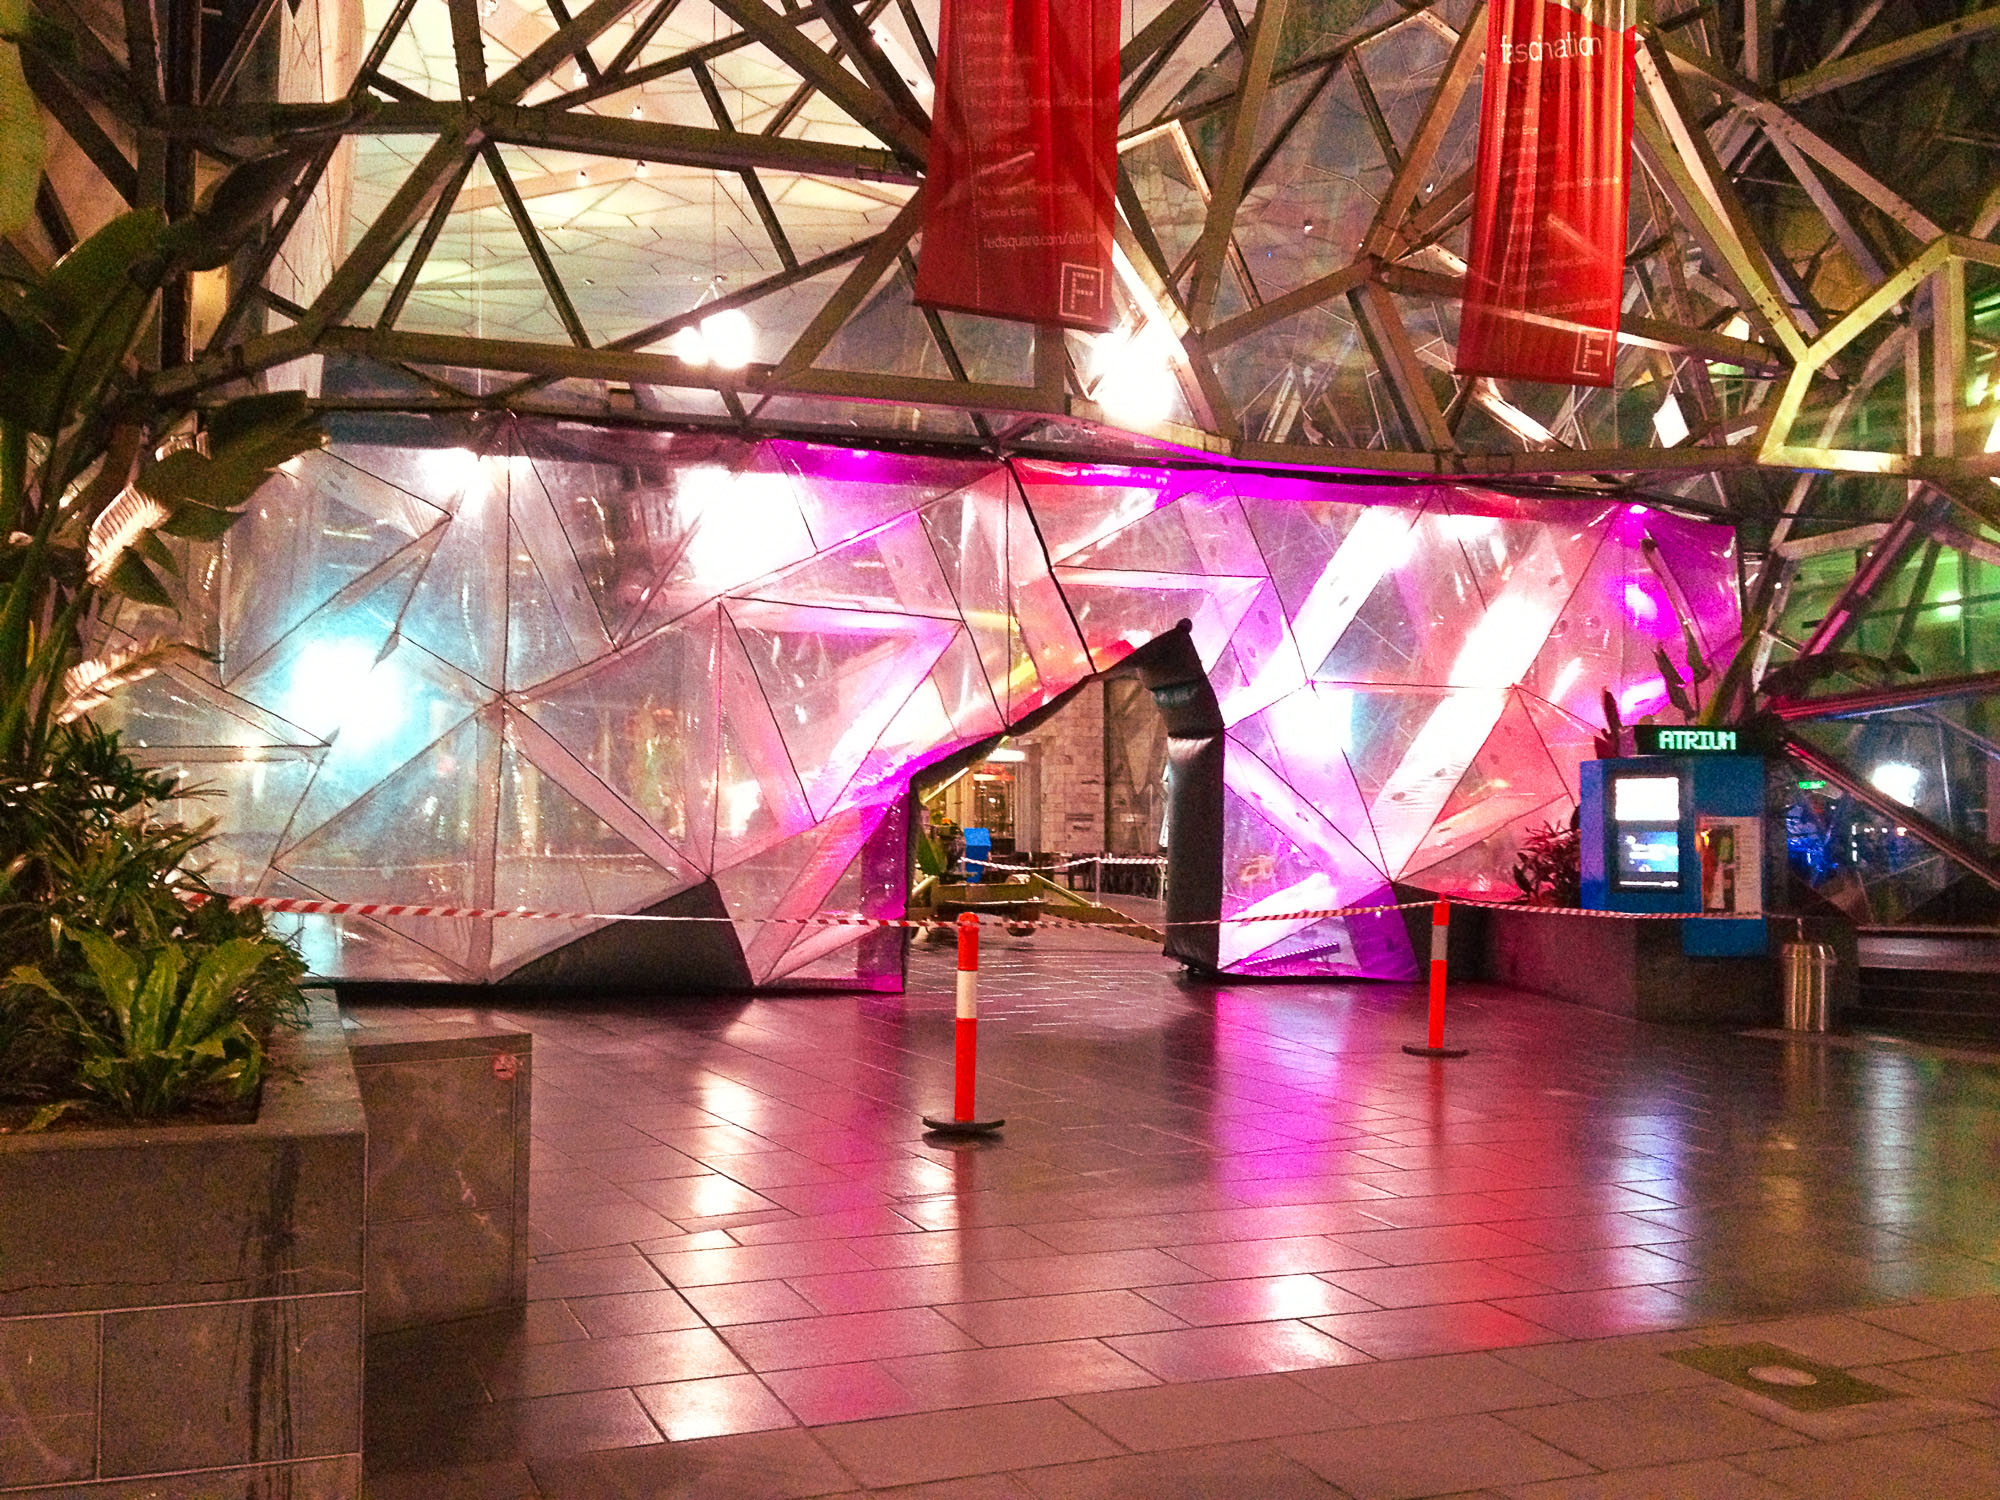 Internal lighting was added to the inflatable wall to illuminate the temporary structure at night and showcase the piece as a separate although integrated design.